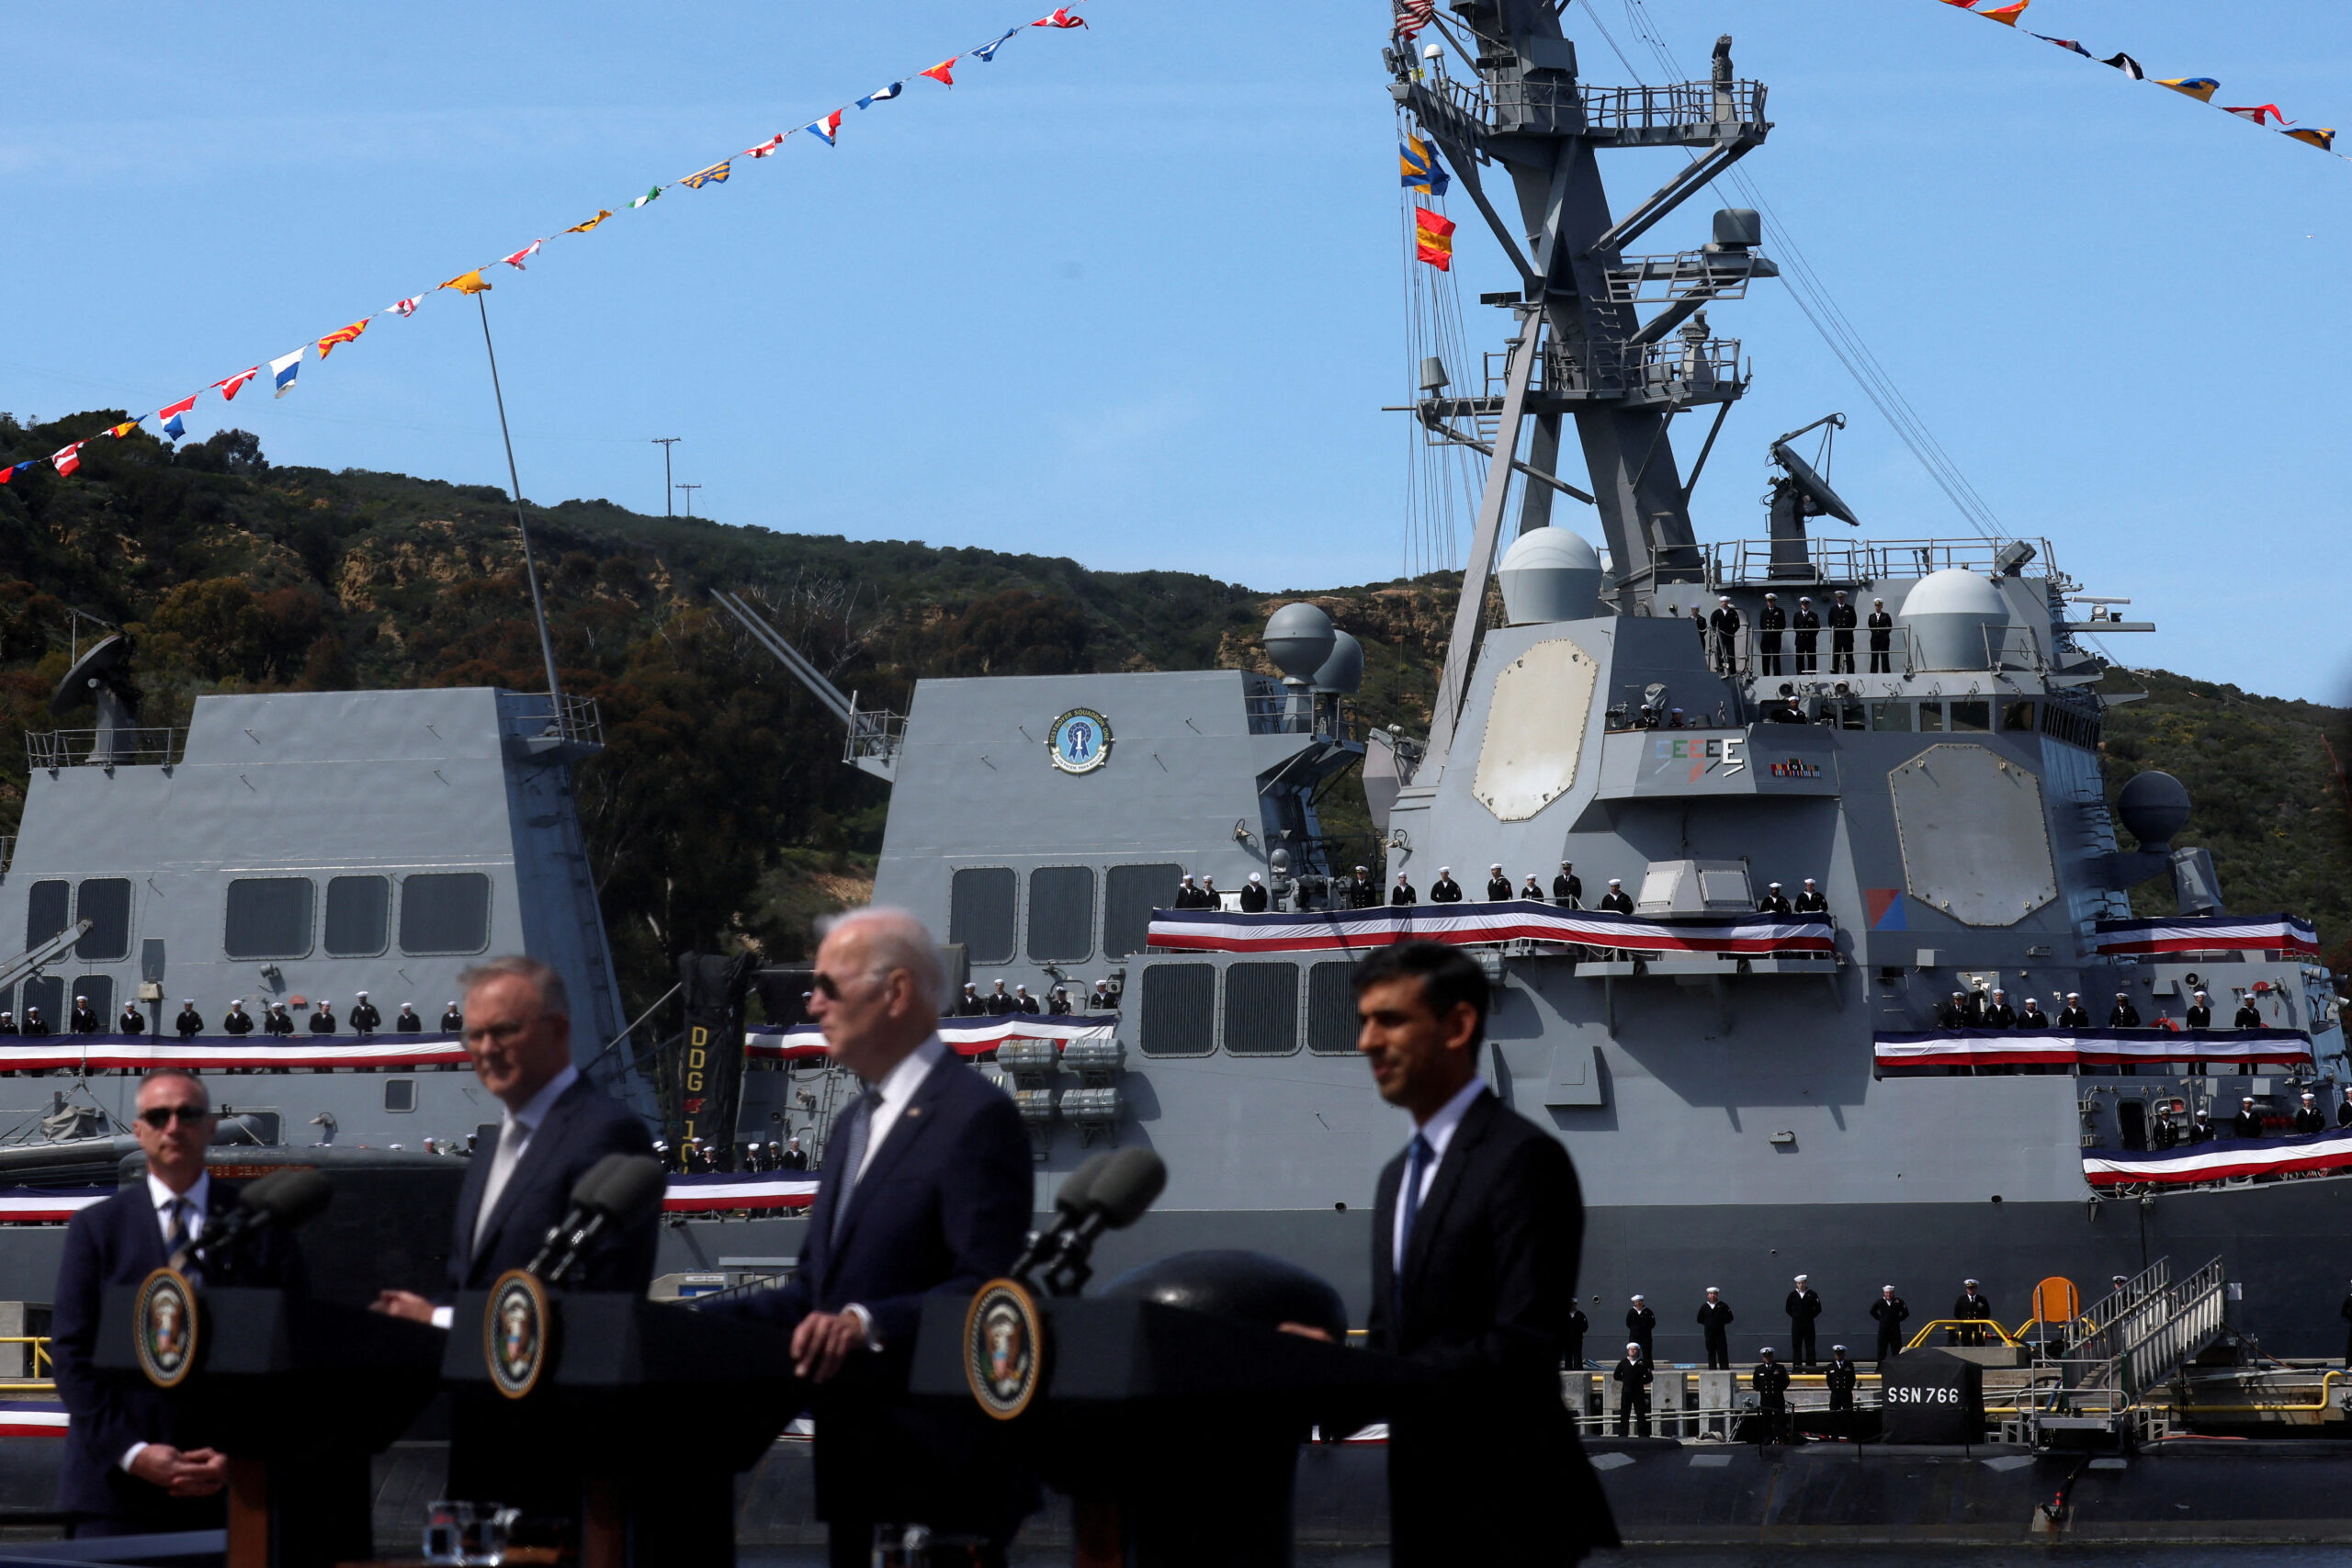 U.S. President Biden meets with Australian PM Albanese and British PM Sunak at Naval Base Point Loma in San Diego. REUTERS/Leah Millis/File Photo